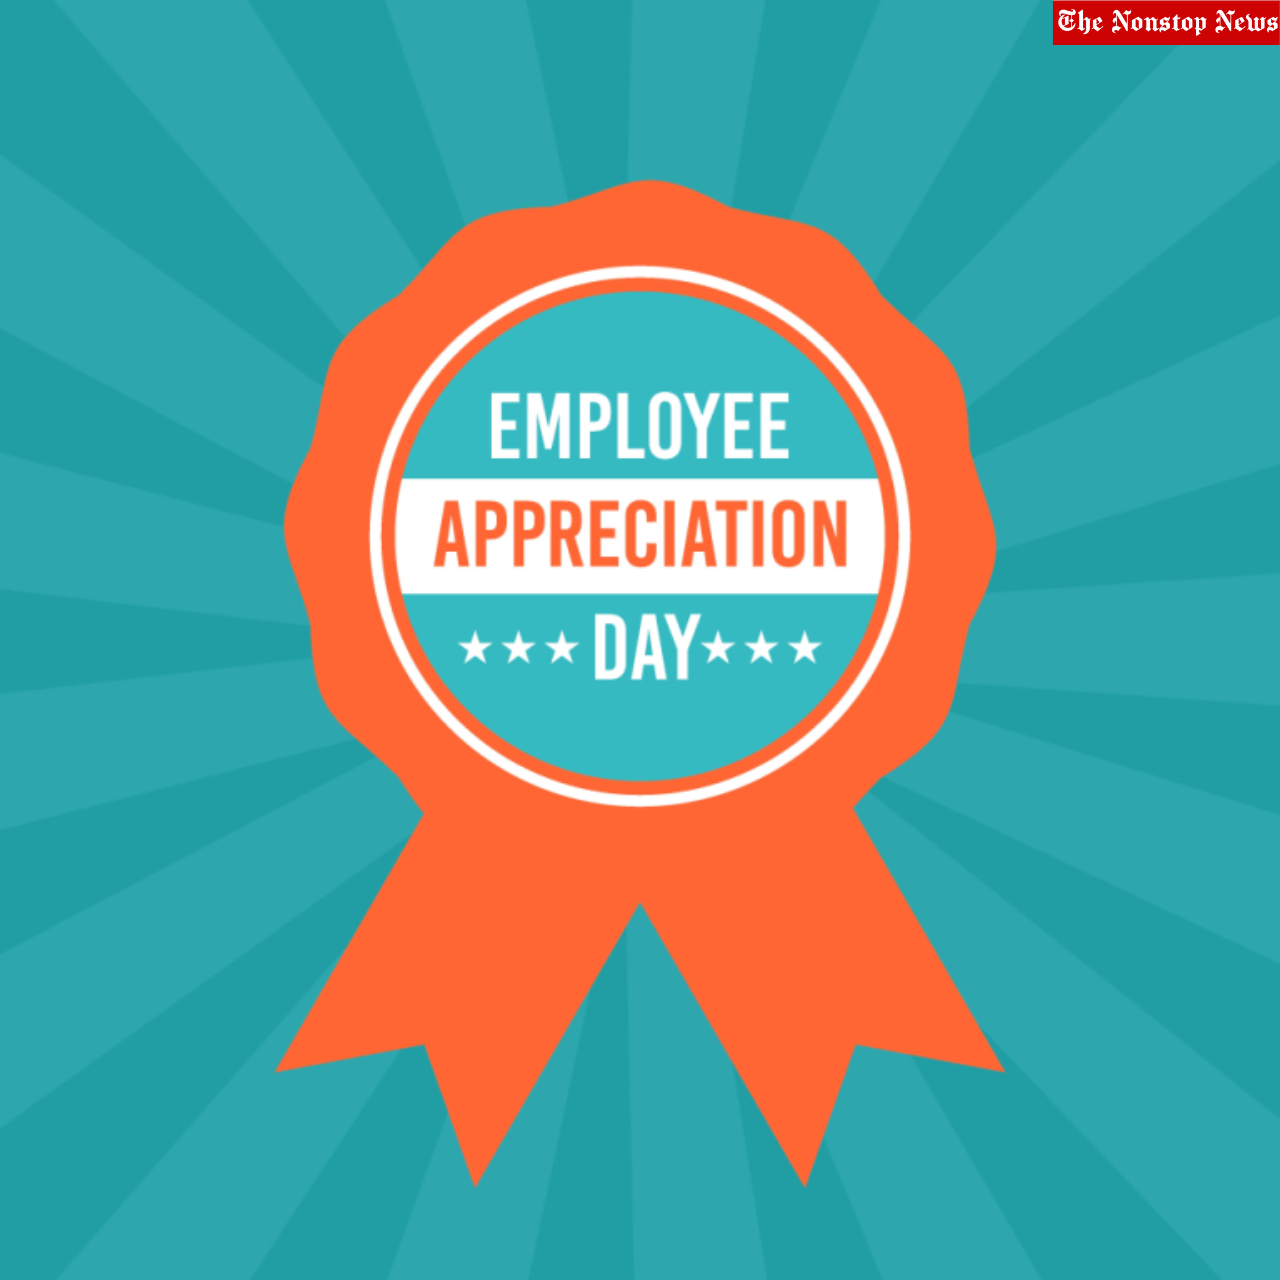 Employee Appreciation Day 2023 Quotes, Messages, Images, Greetings, Sayings, Wishes, Posters, Banners, Cliparts, and Instagram Captions